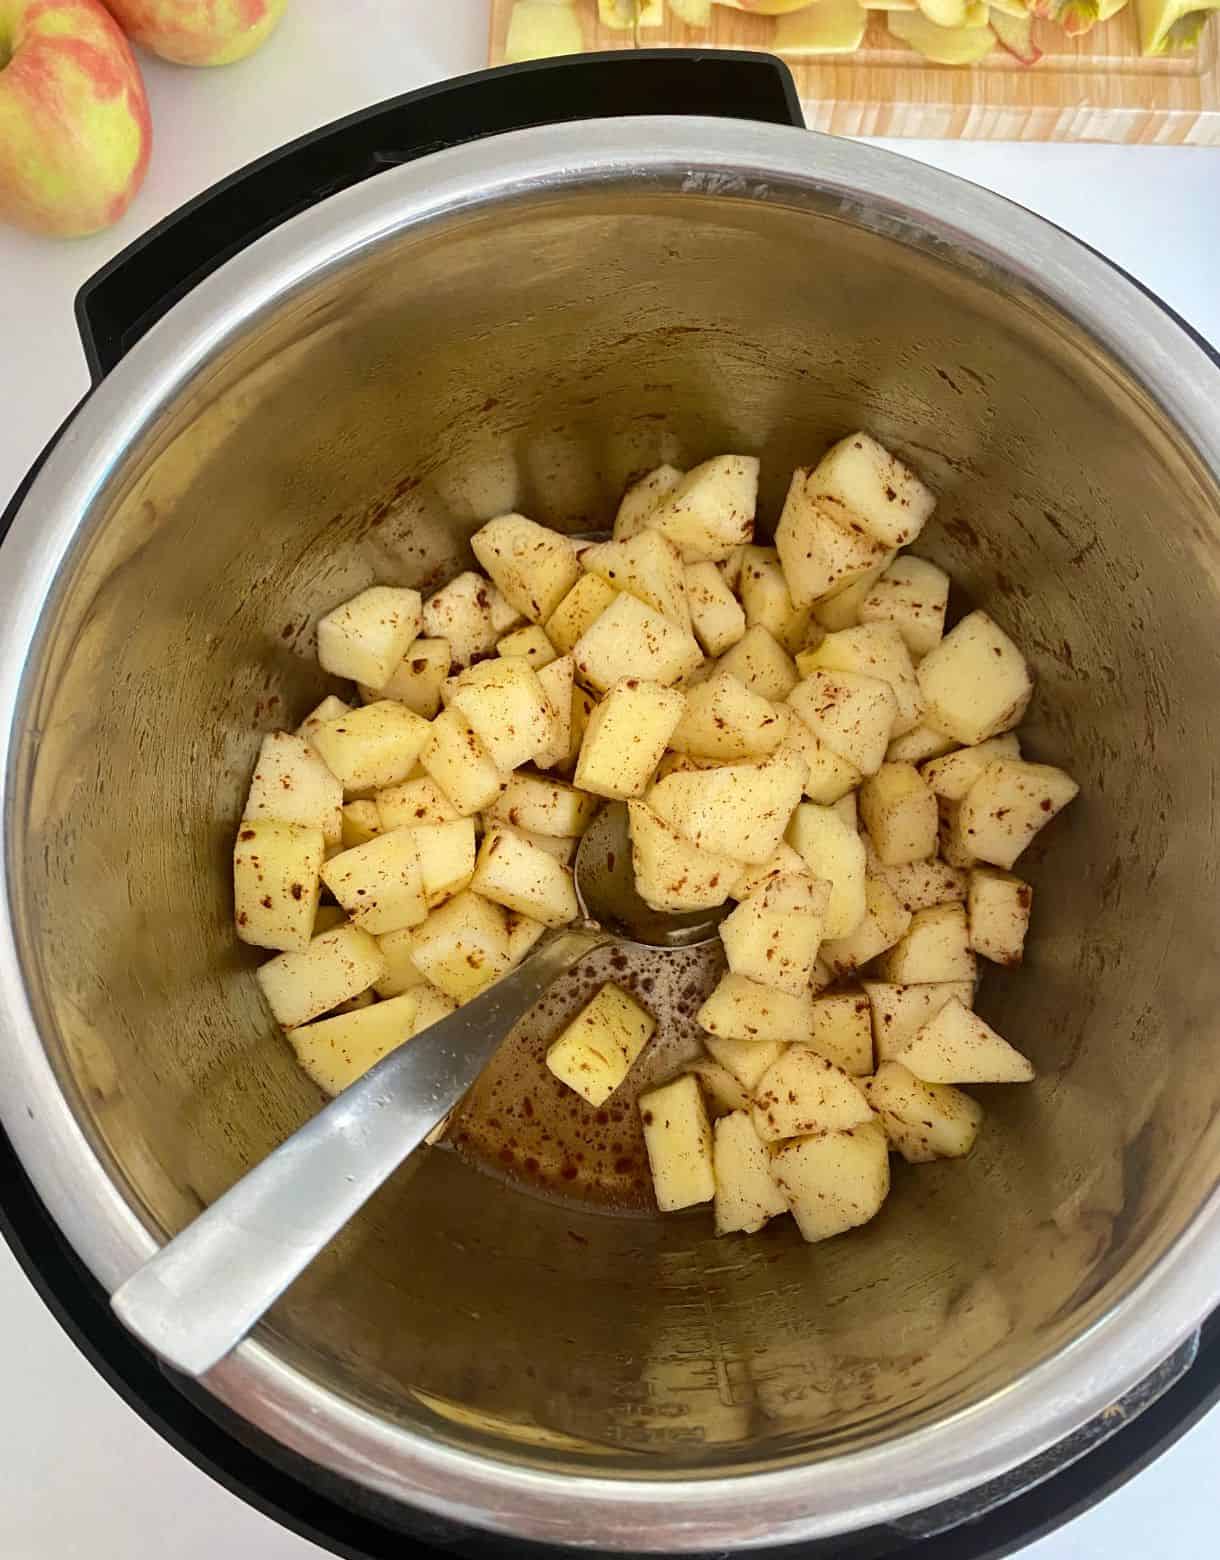 A slow cooker with diced apples and cinnamon.